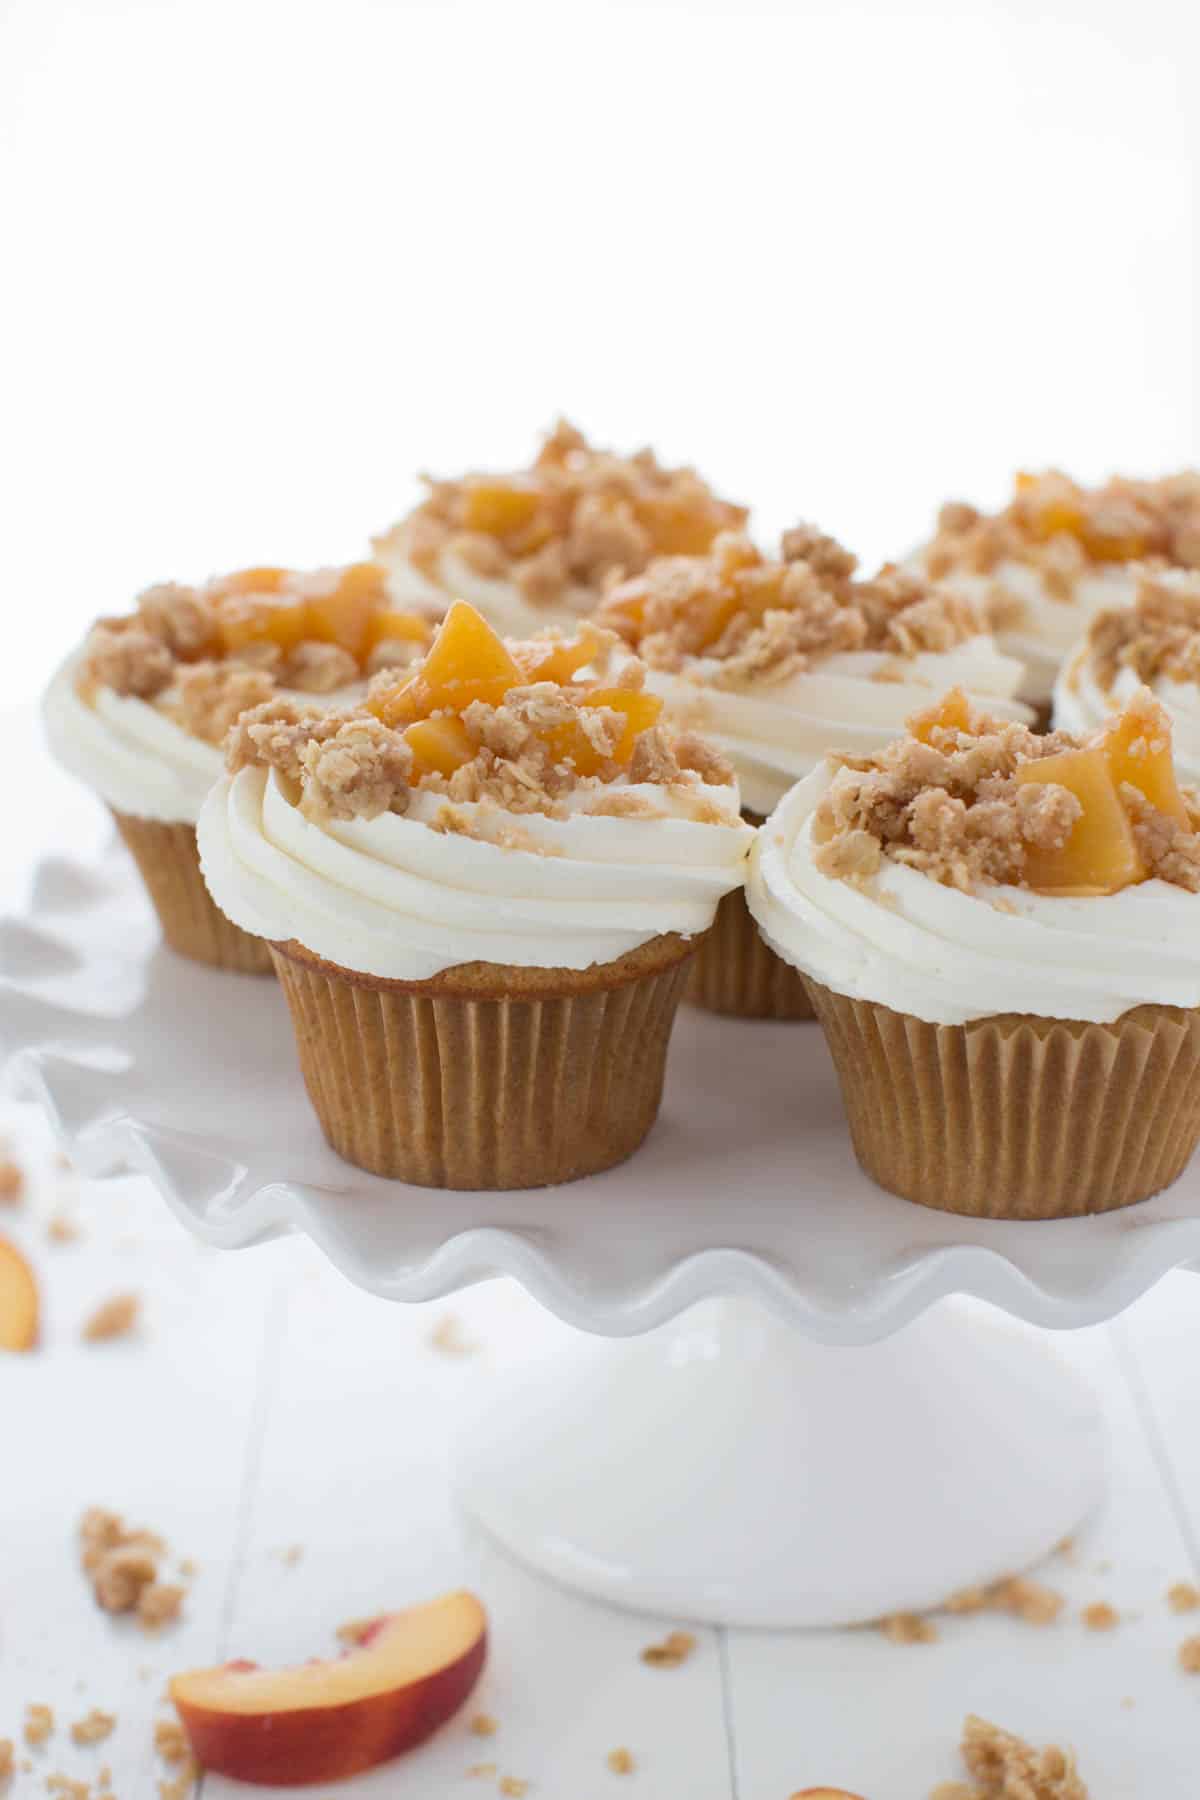 Peach pie cupcakes with vanilla bean frosting and peach filling on top of a white serving plate.